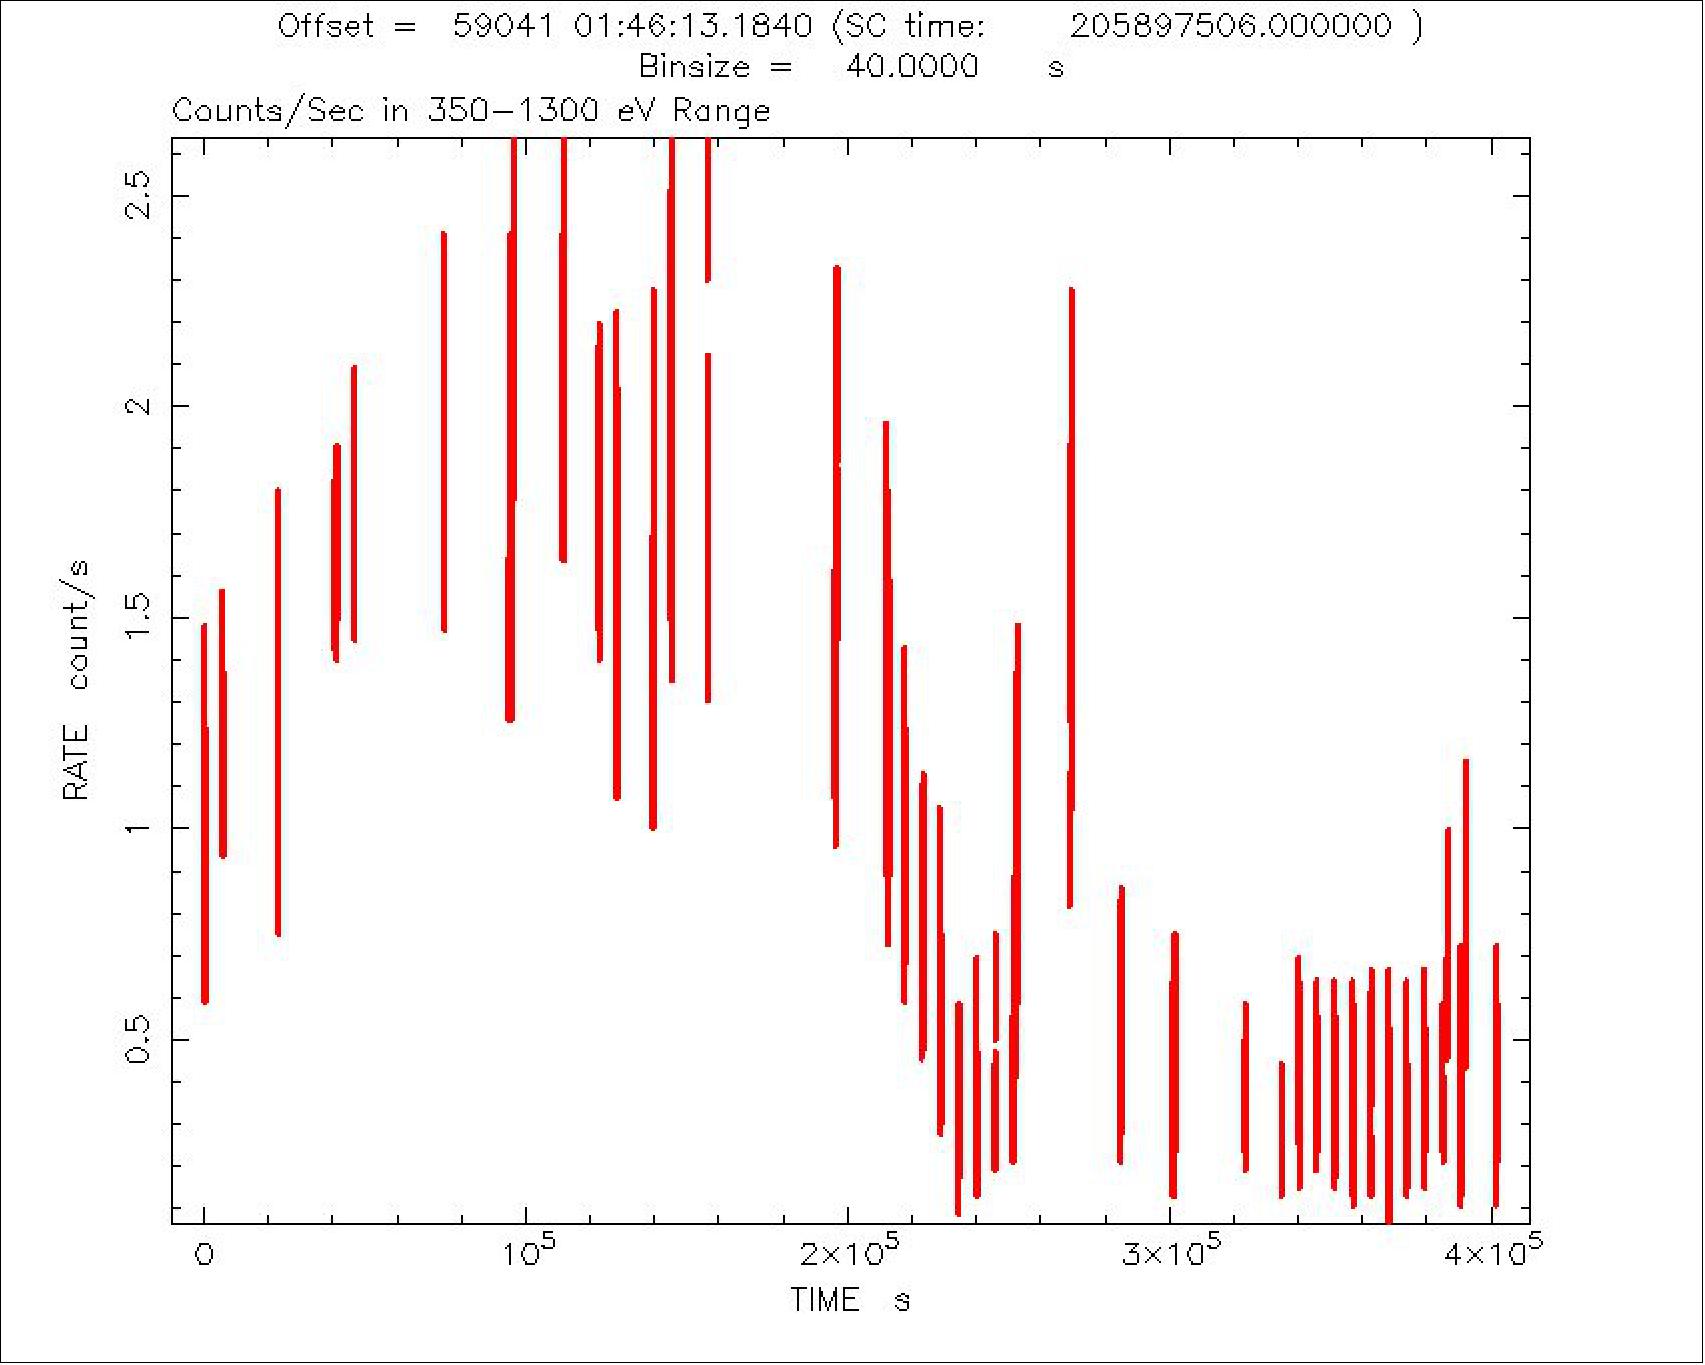 Figure 19: The measured brightness of AT2020ocn as a function of time for X-rays in the energy range 350-1300 eV (image credit: NASA/GSFC)